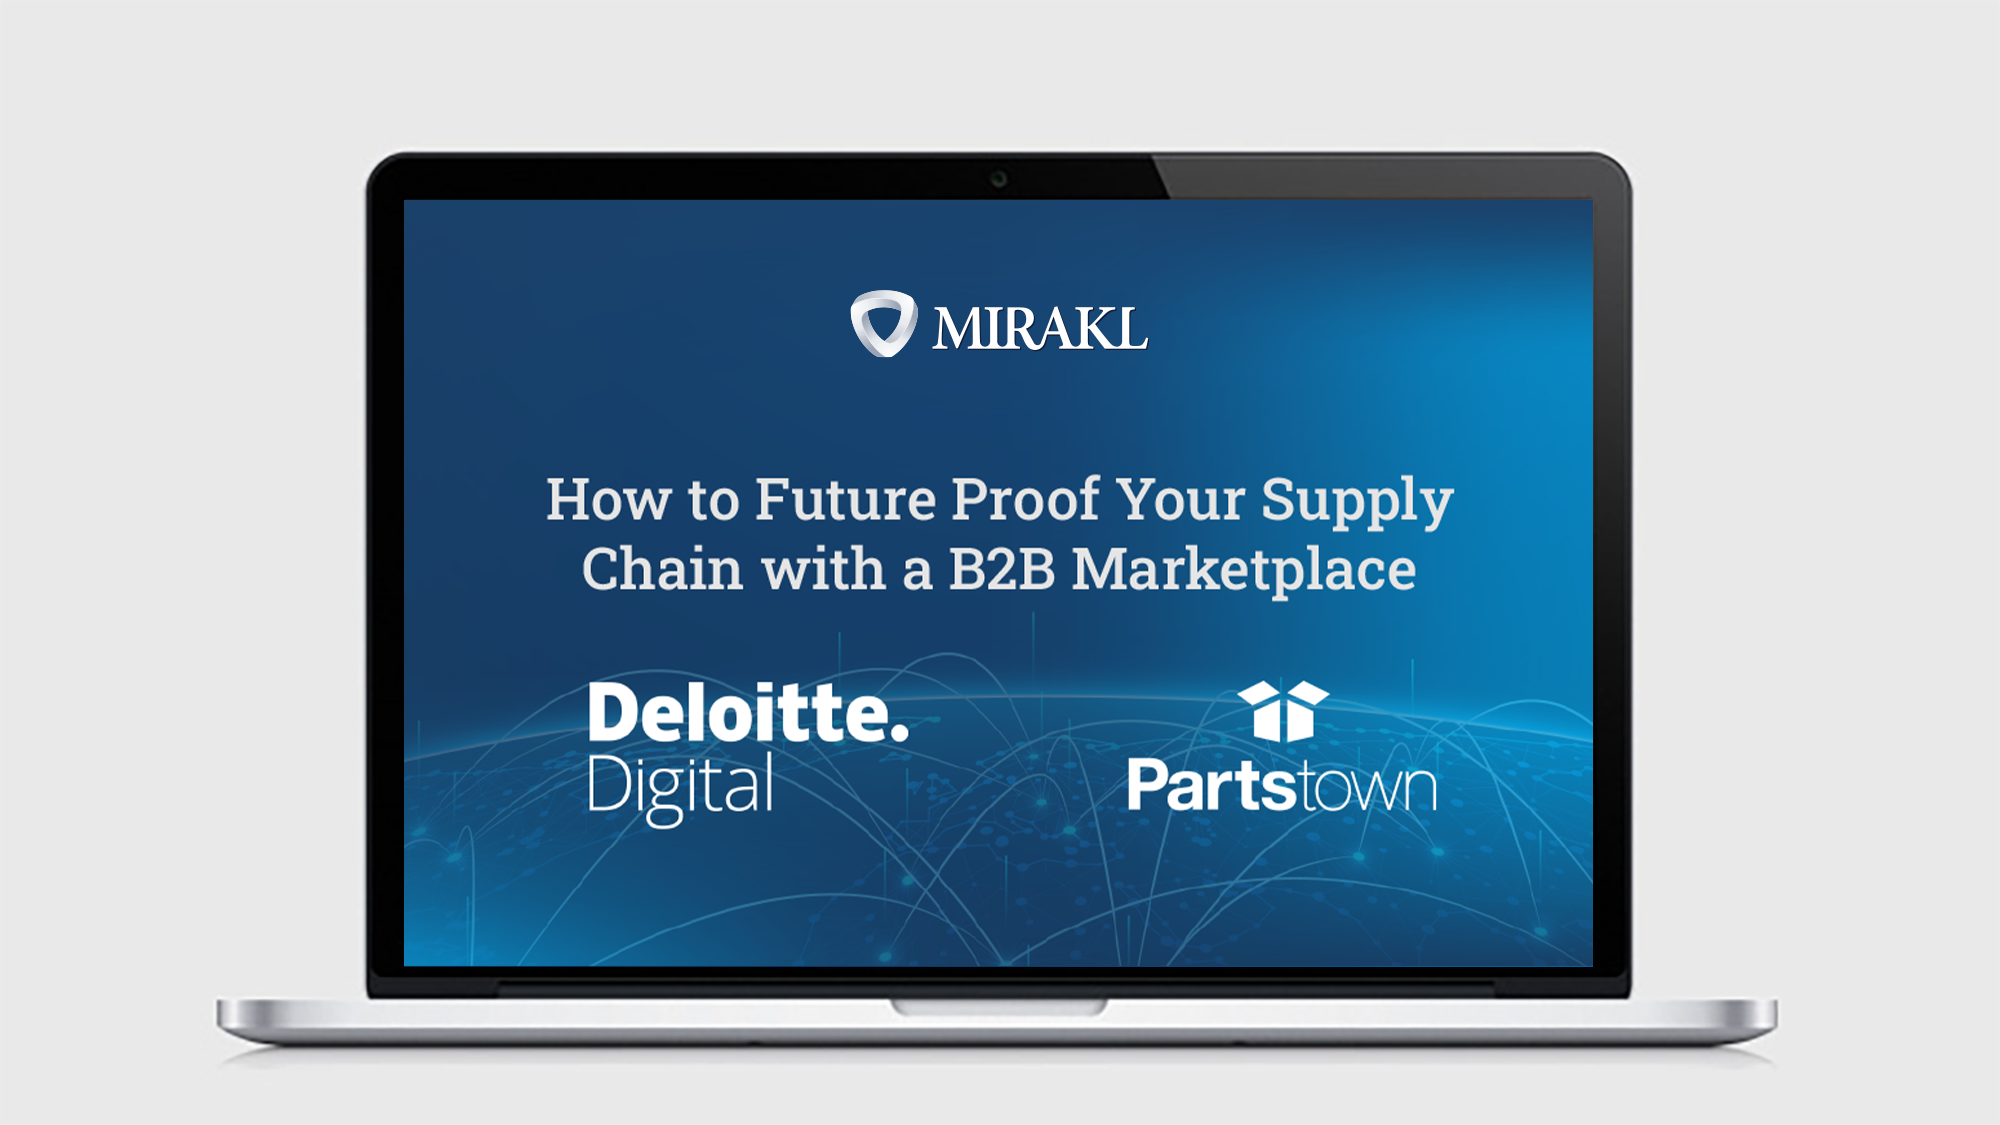 How to Future Proof Your Supply Chain with a B2B Marketplace